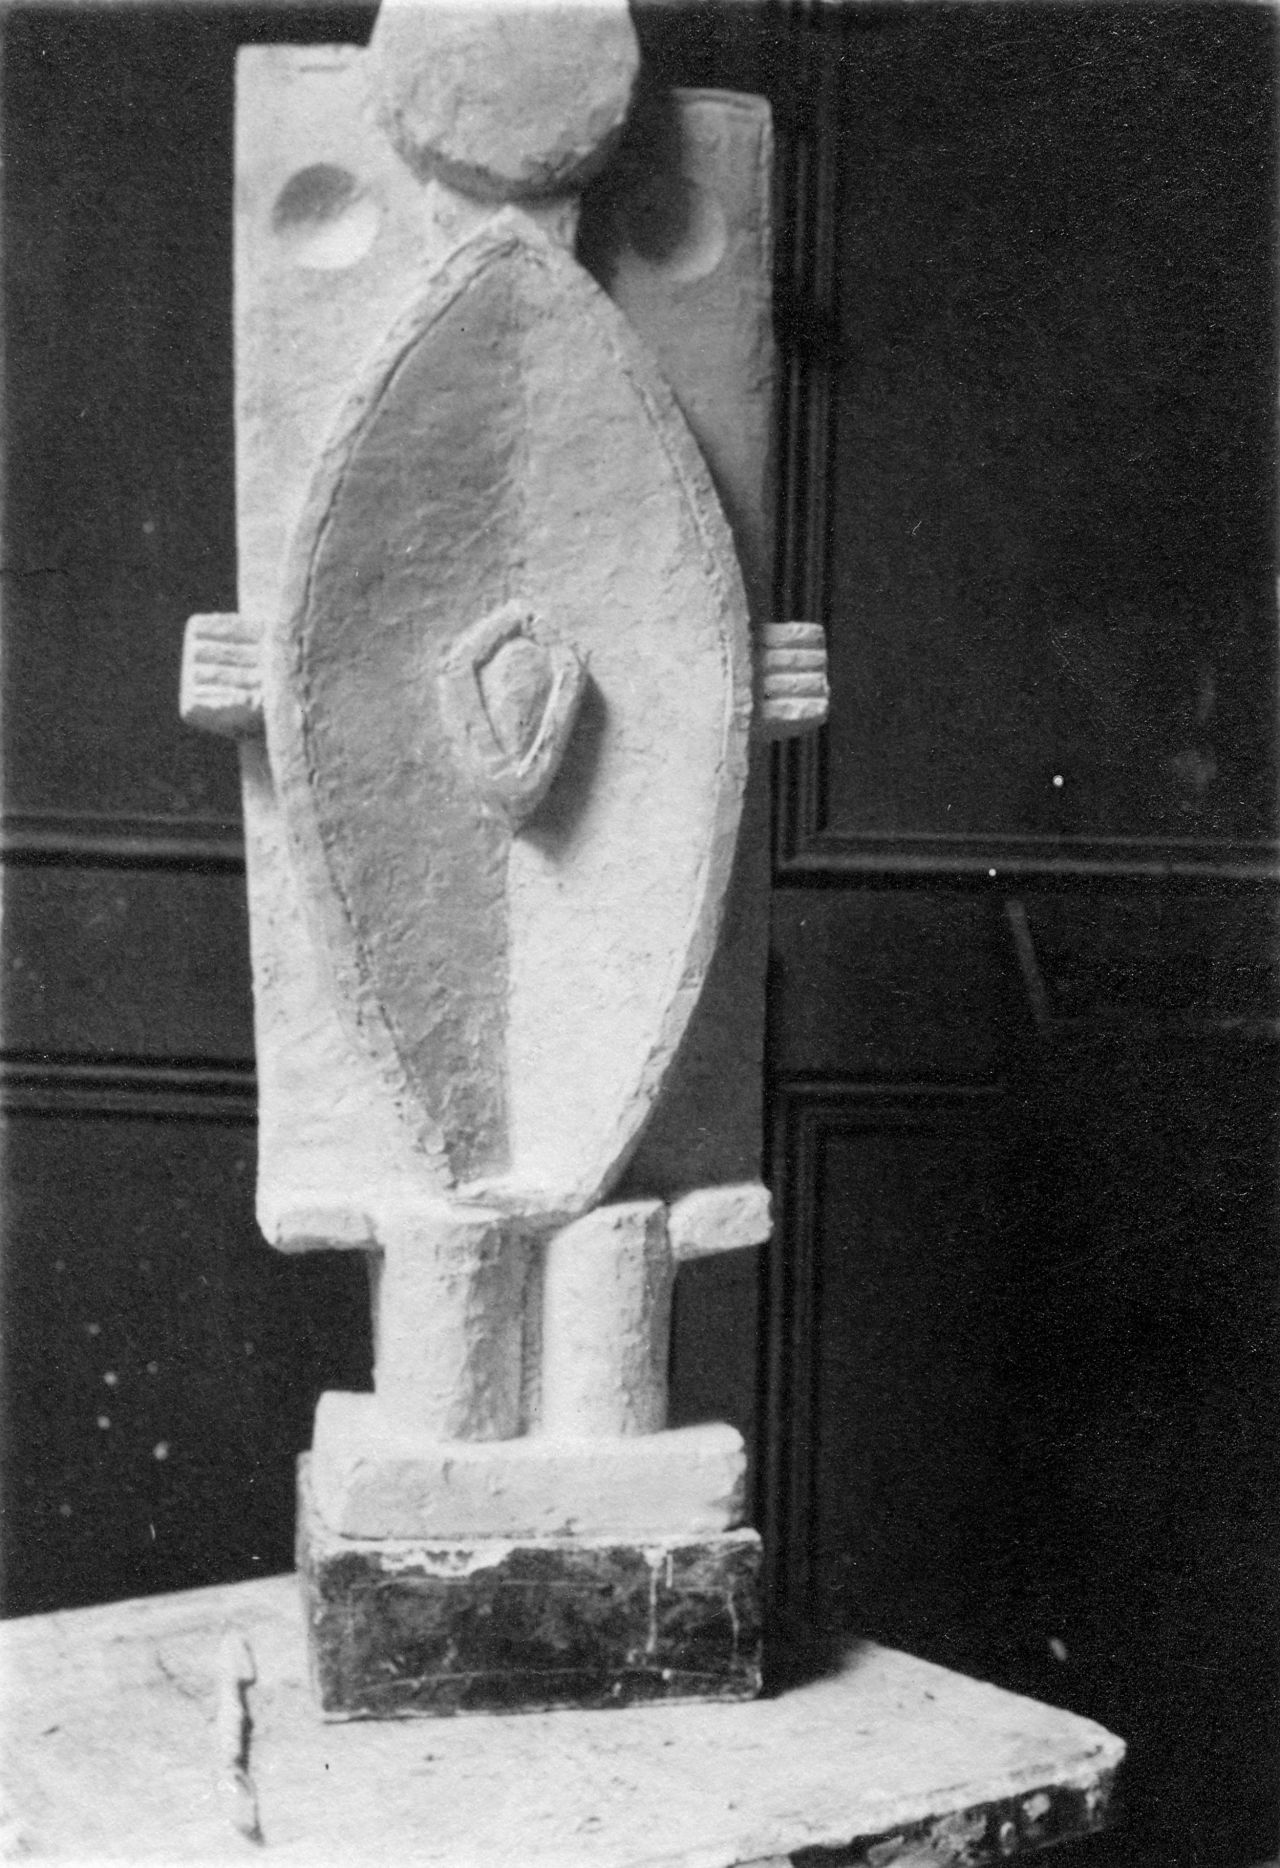 The playful plaster work "Composition" (1926-1927) predates the artist's Surrealist period and is still missing today.